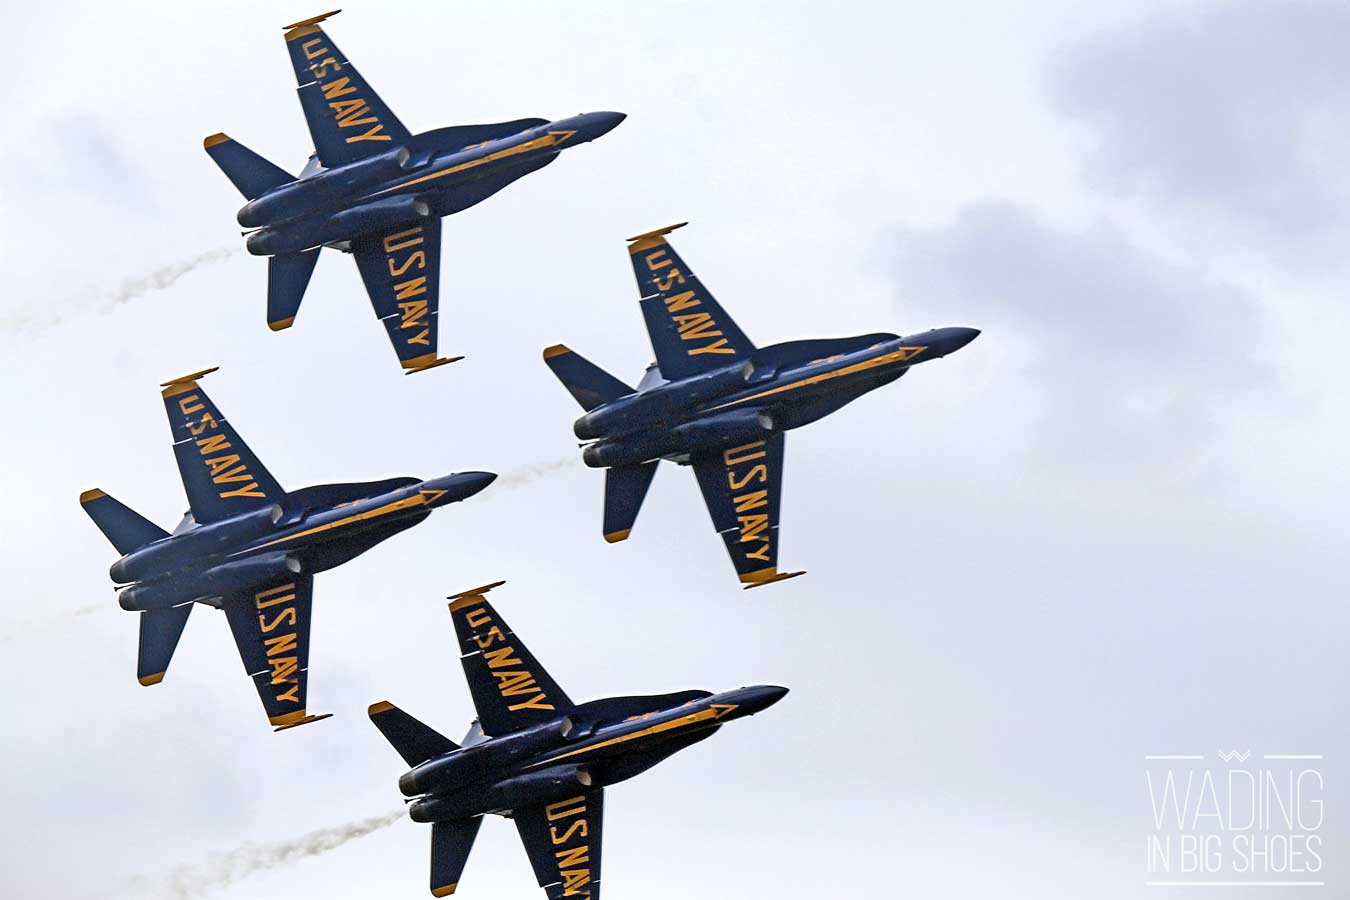 What To Expect When You Visit The Thunder Over Michigan Air Show | via Wading in Big Shoes